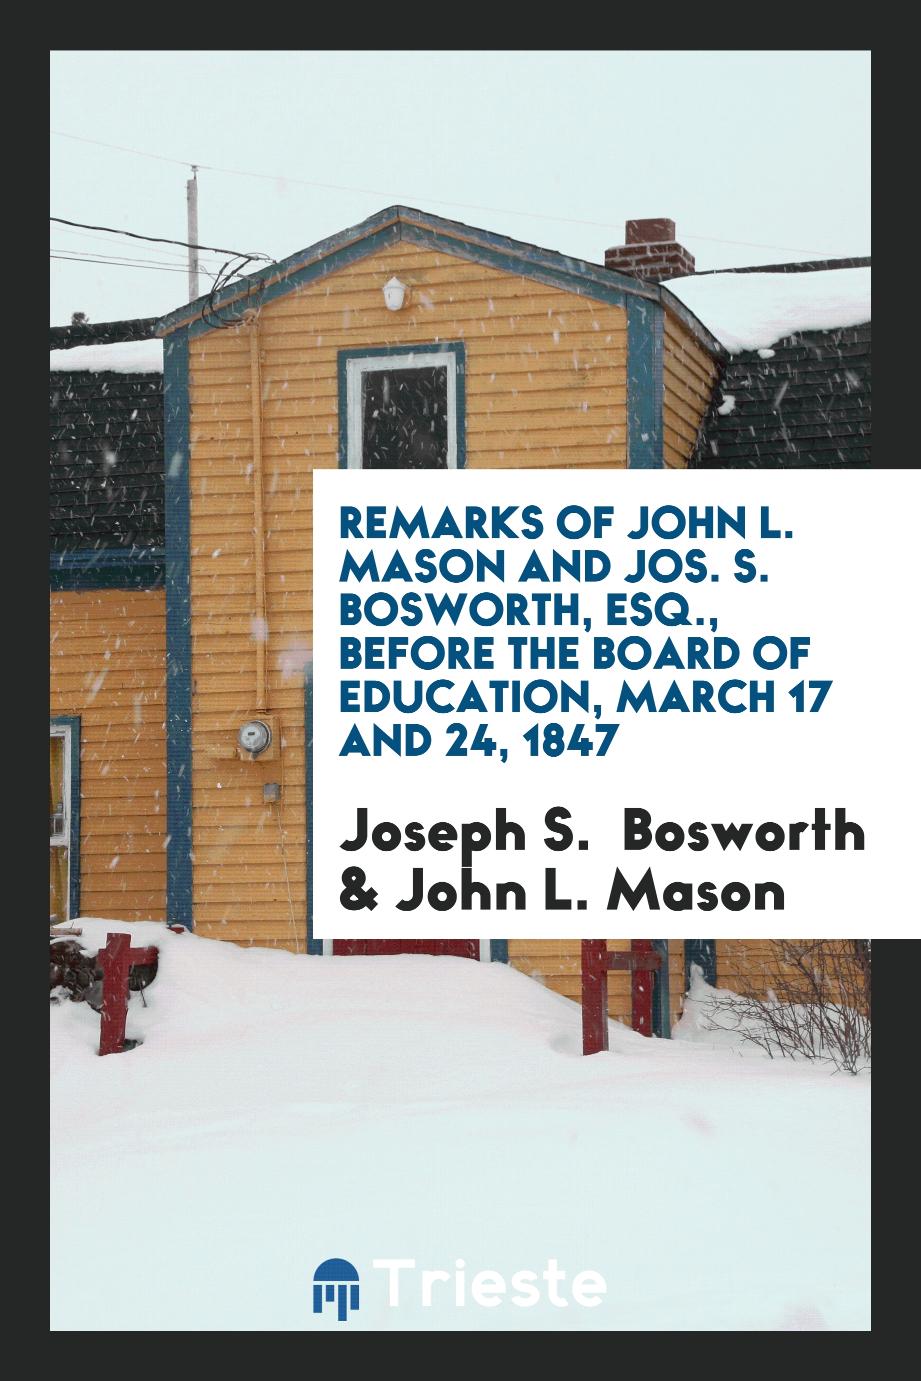 Remarks of John L. Mason and Jos. S. Bosworth, ESQ., Before the Board of Education, march 17 and 24, 1847